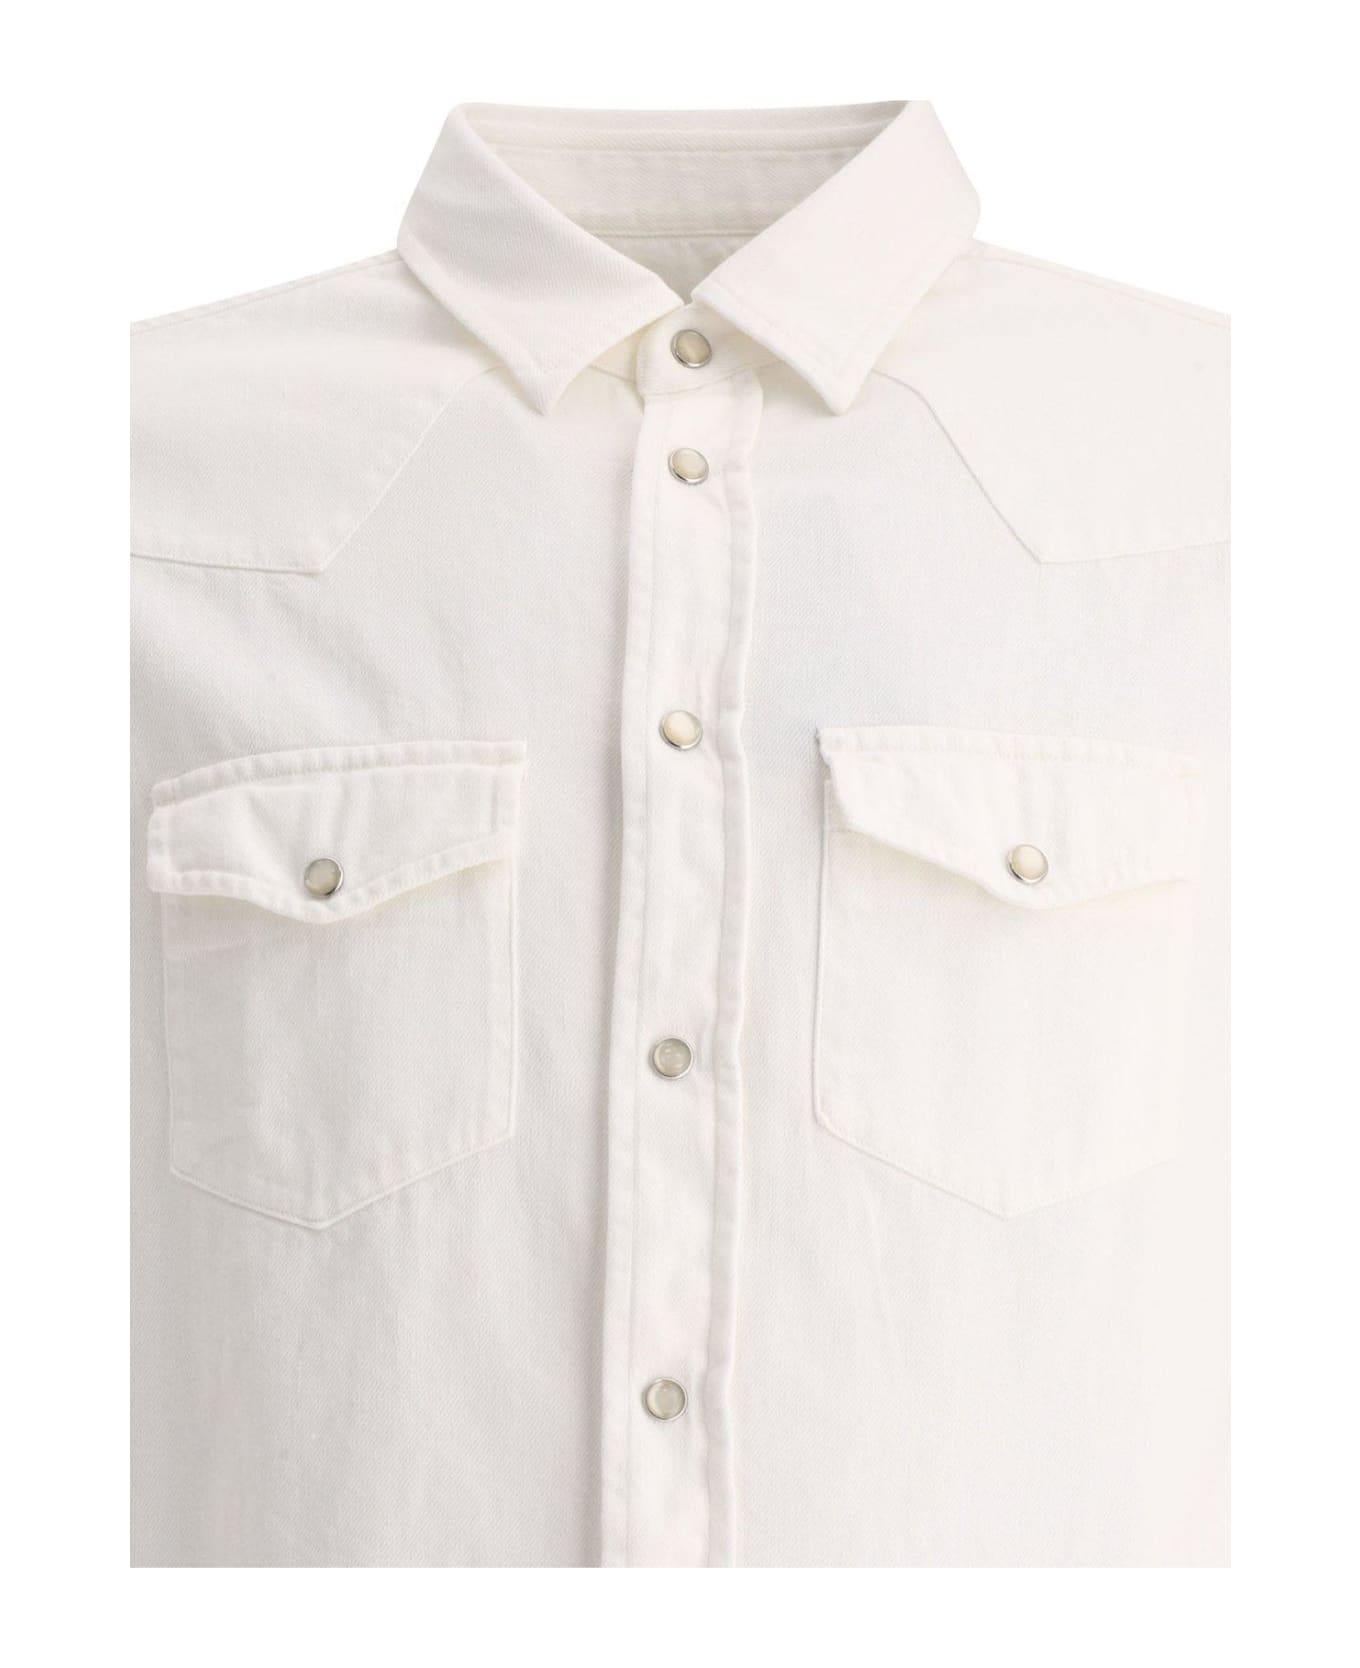 Tom Ford Patch Pocket Long-sleeved Shirt - WHITE